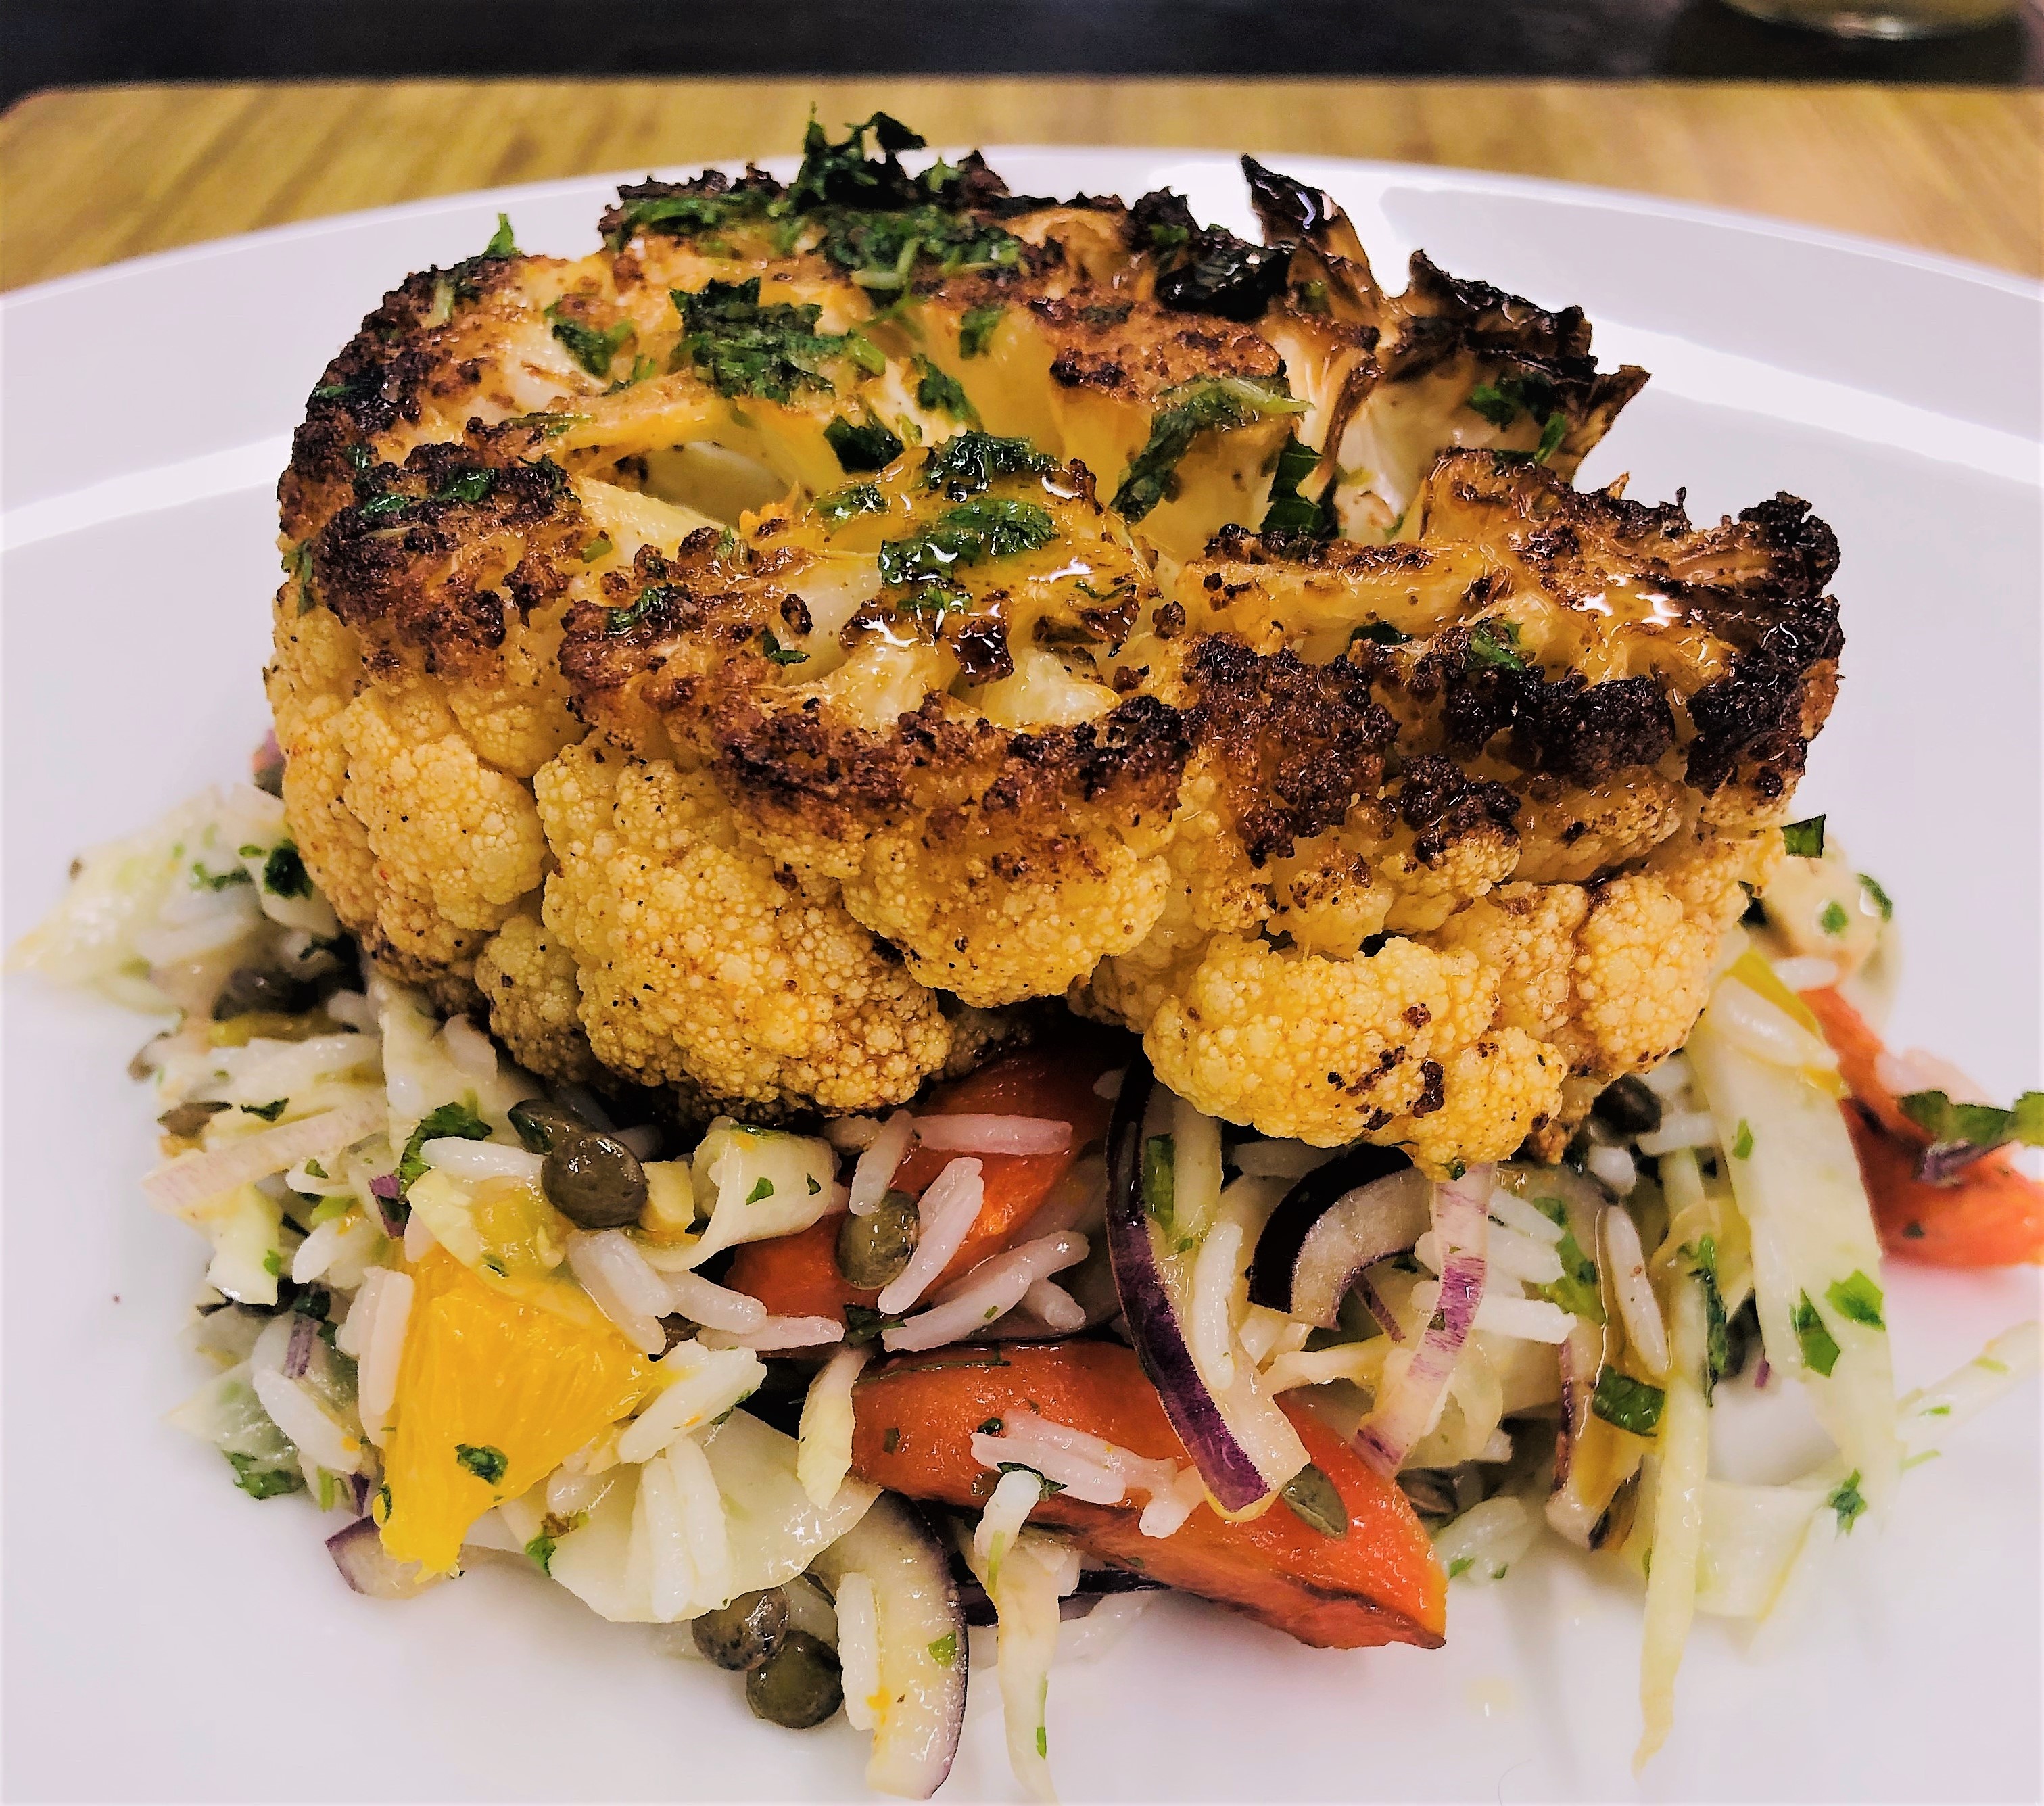 Chipotle spiced cauliflower steaks with wild rice and fennel salad (VG)